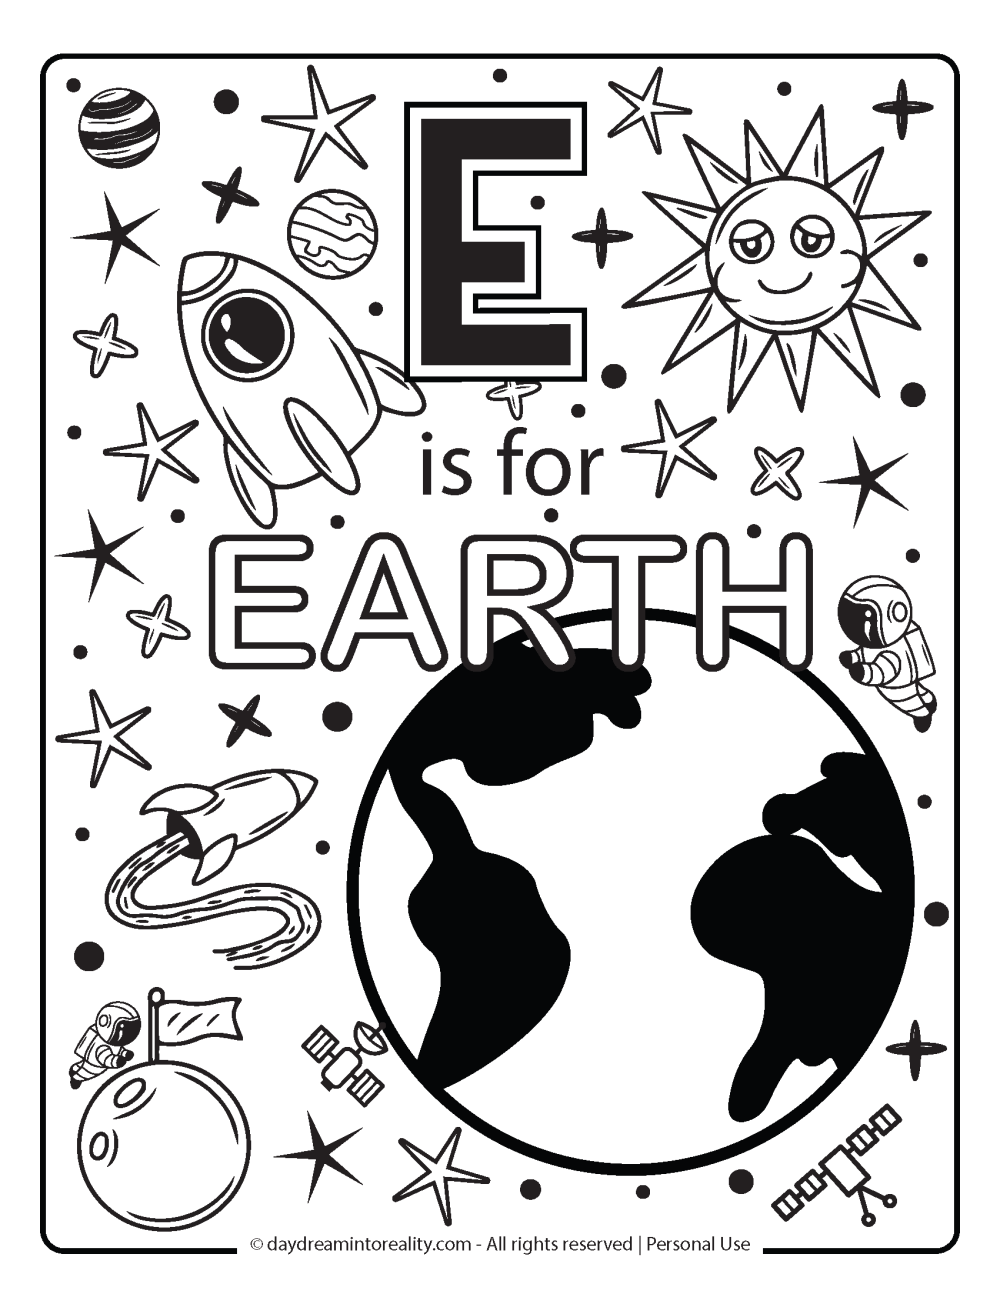 Letter E coloring page worksheet free printables. E is for earth.